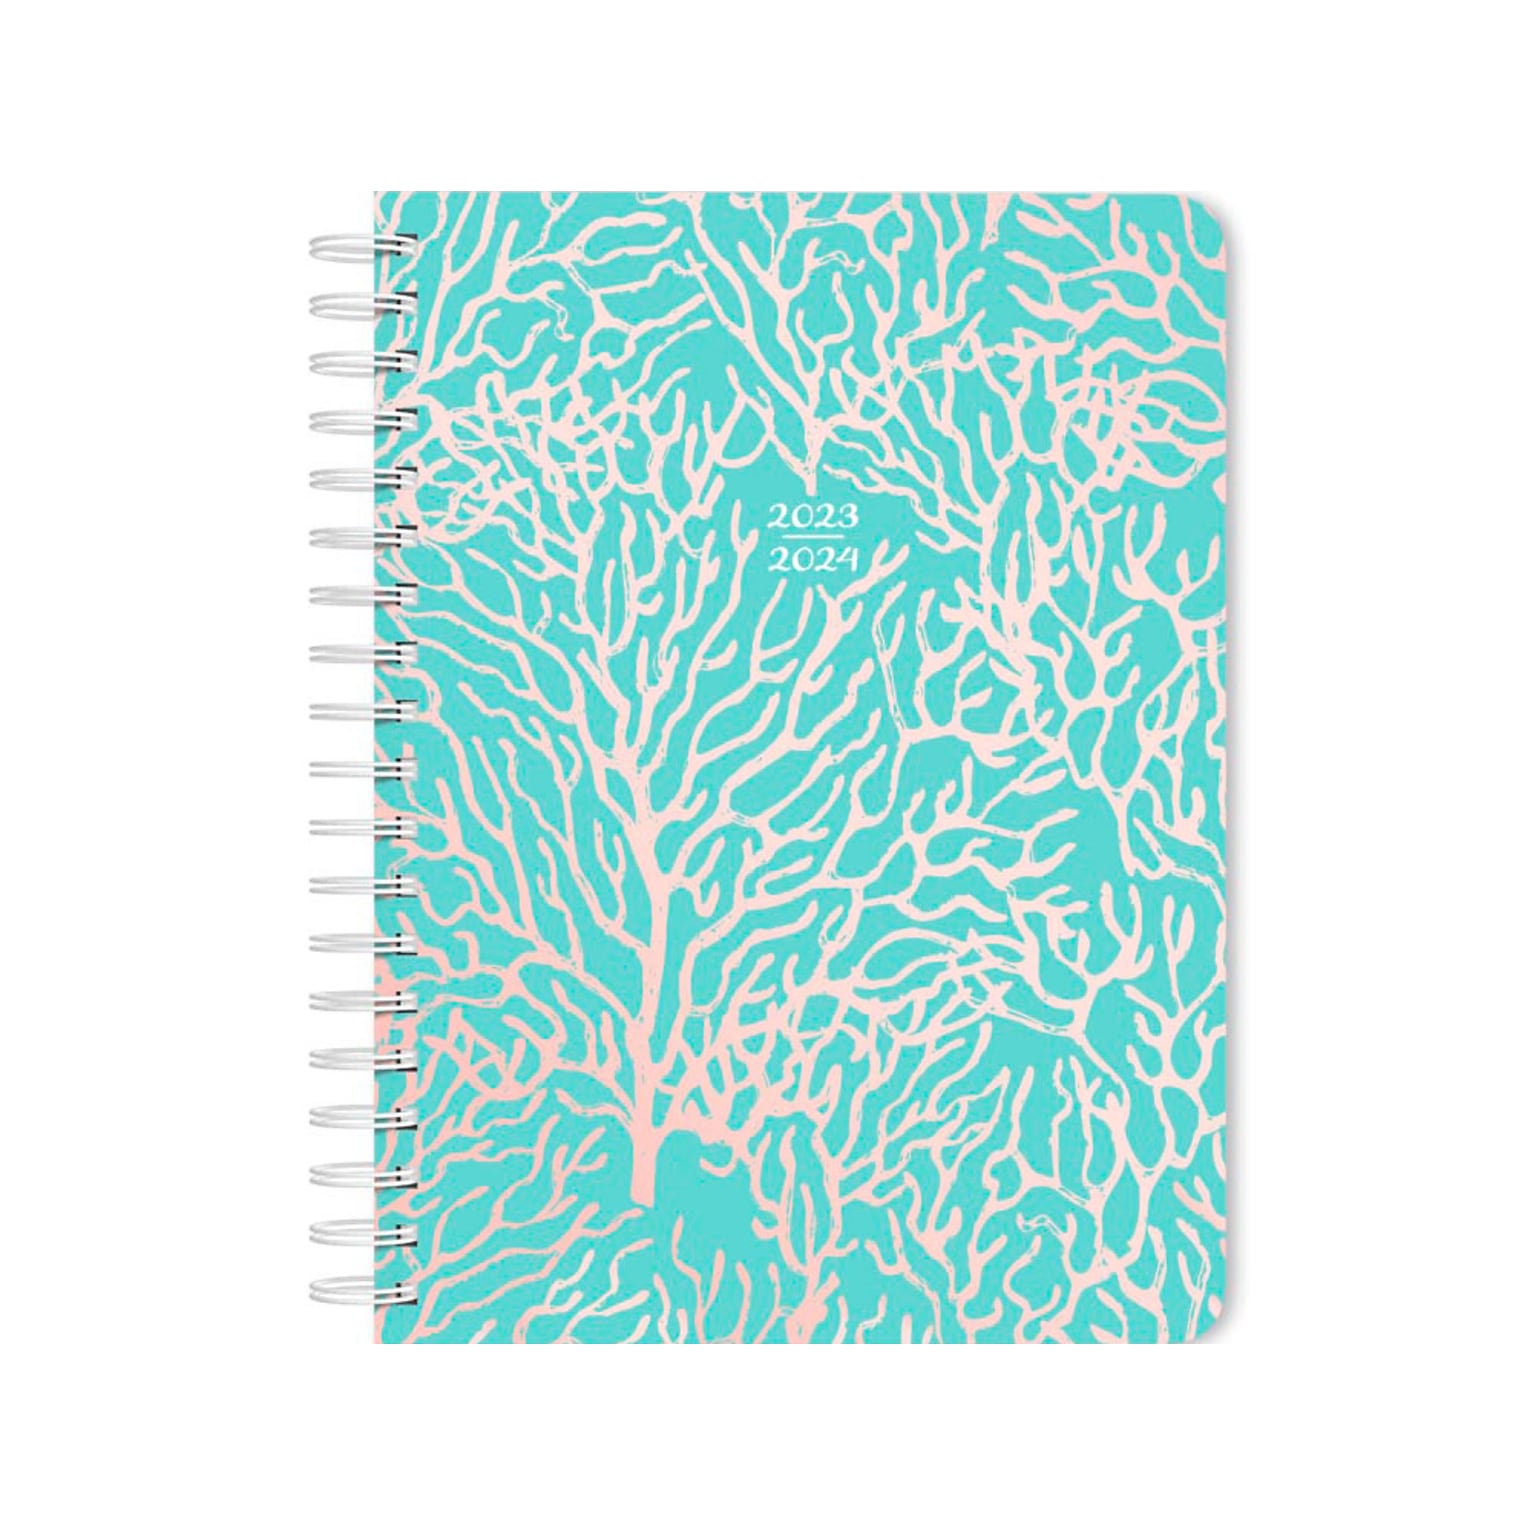 2024 Plato Seaside Currents 6 x 7.75 Academic & Calendar Weekly Planner, Paperboard Cover, Blue/Pink (9781975470579)